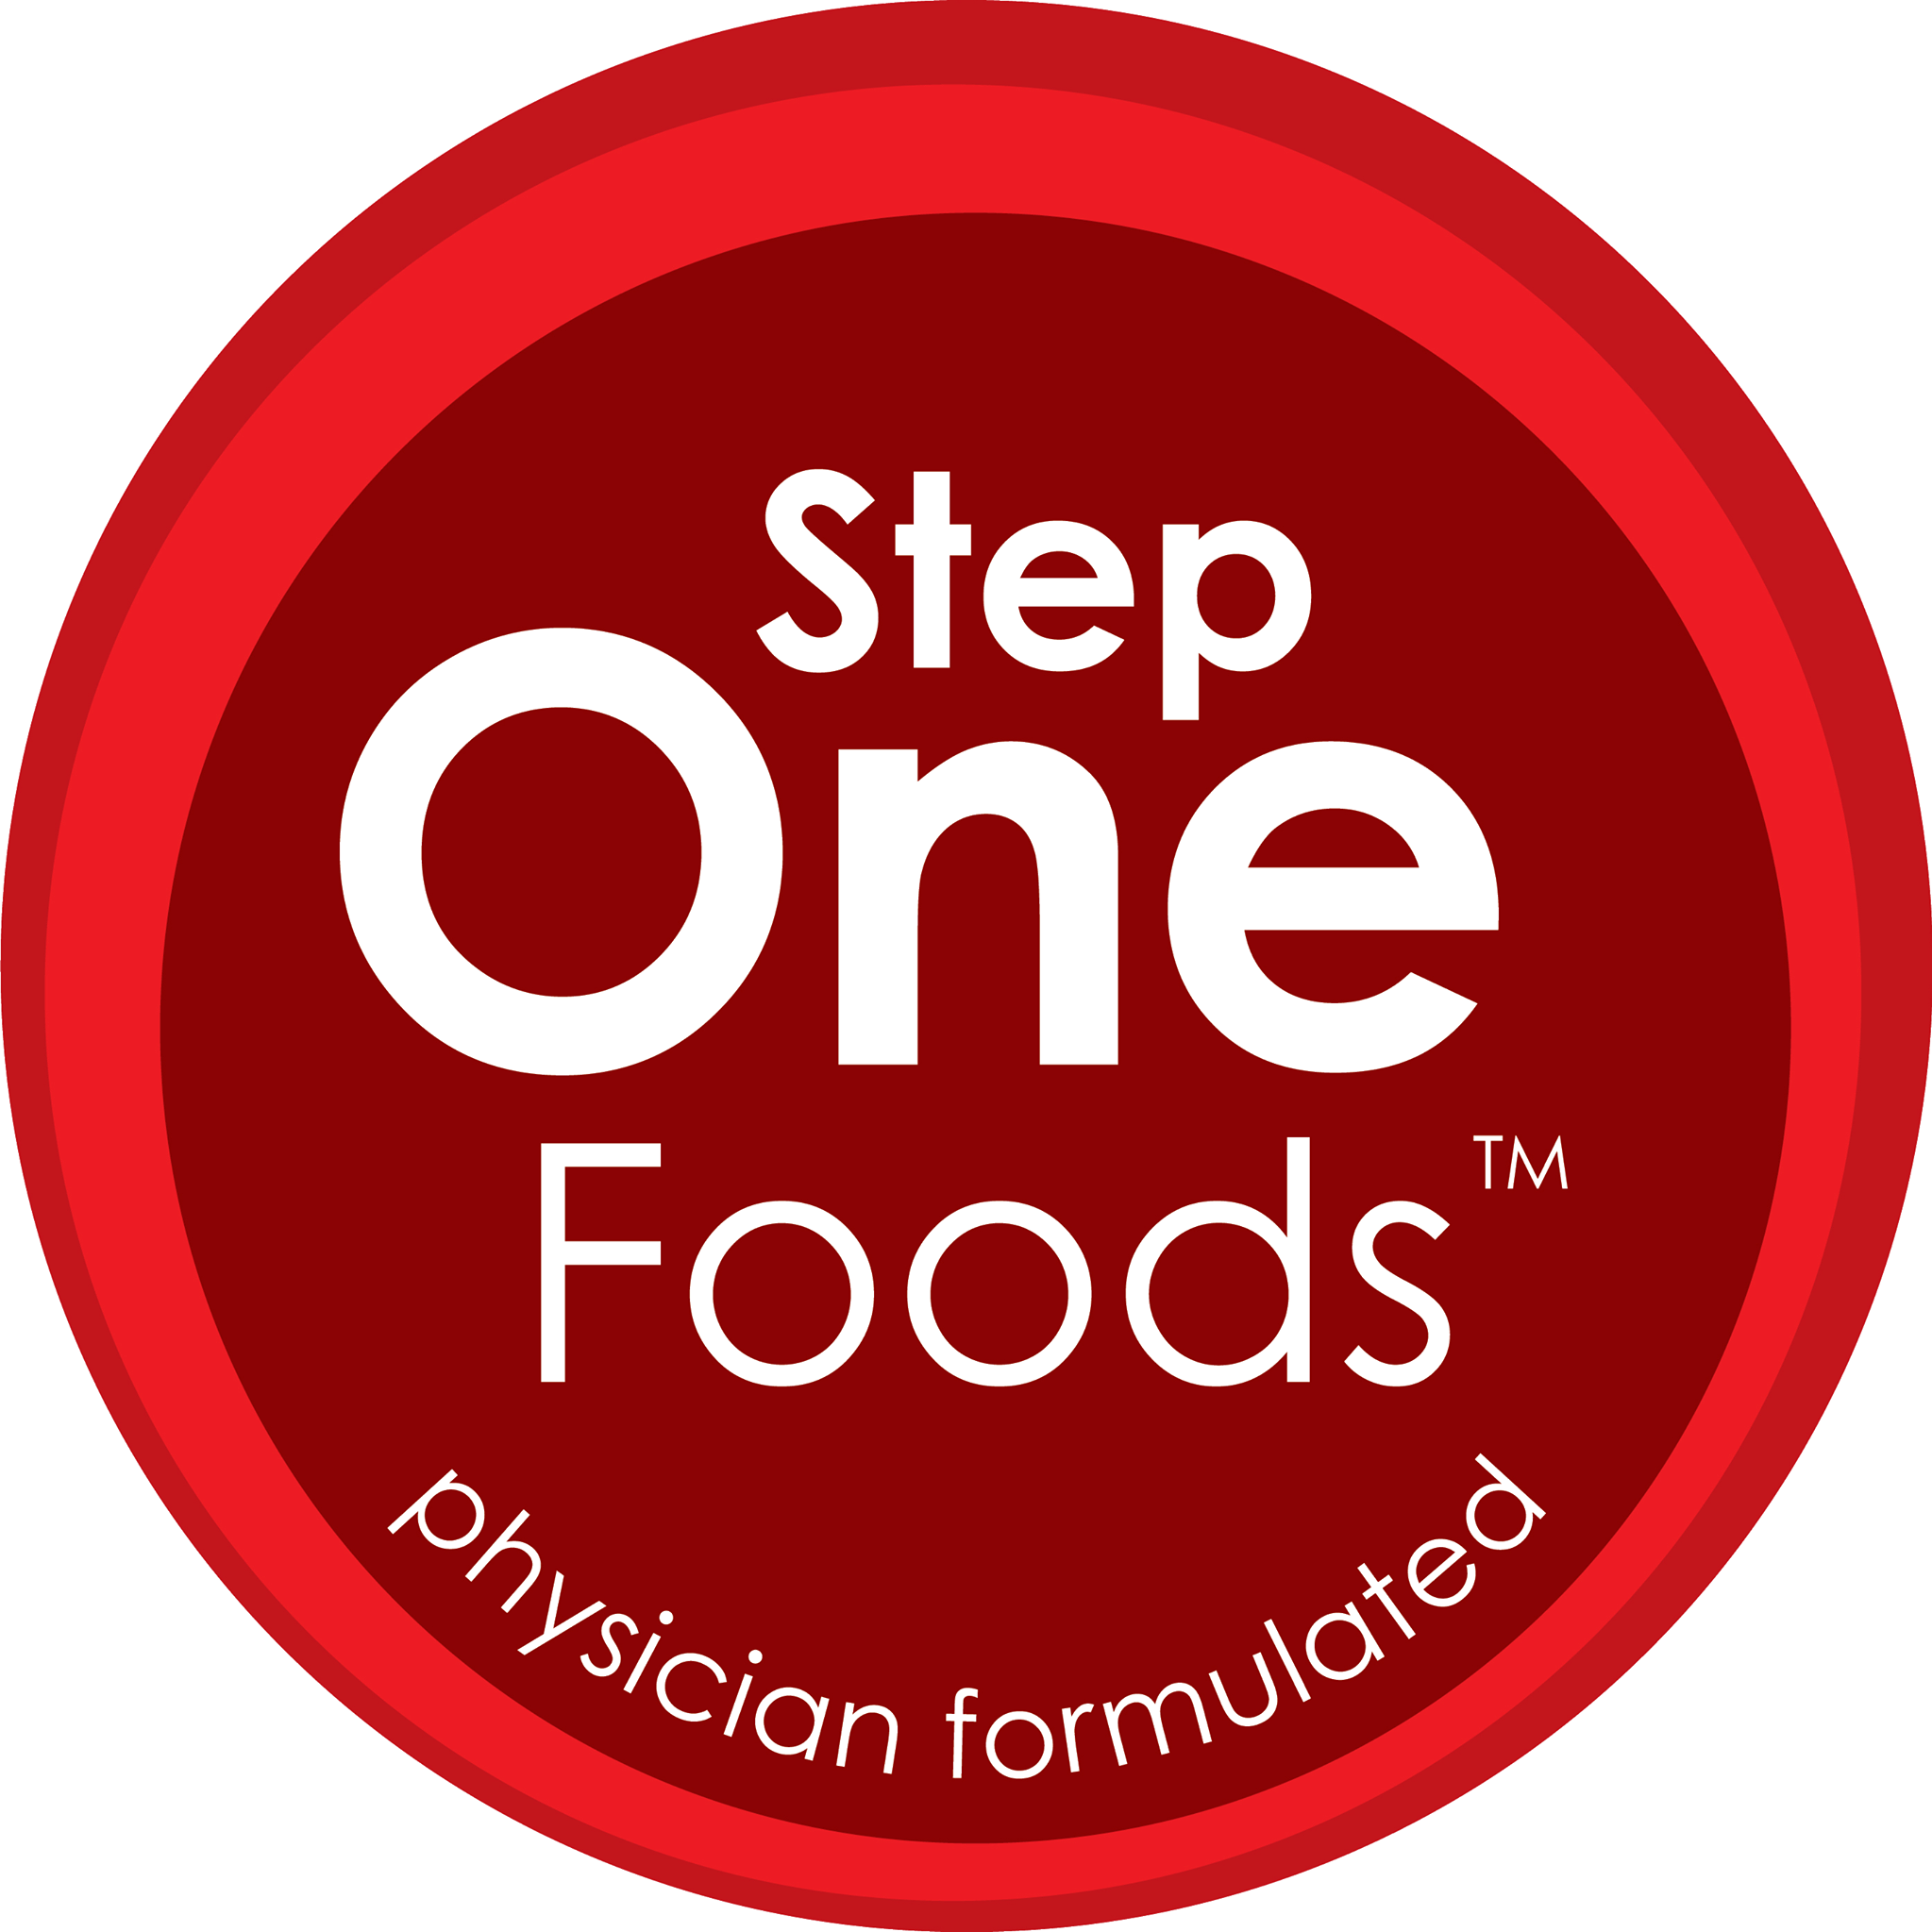 Step One Foods Coupon Codes